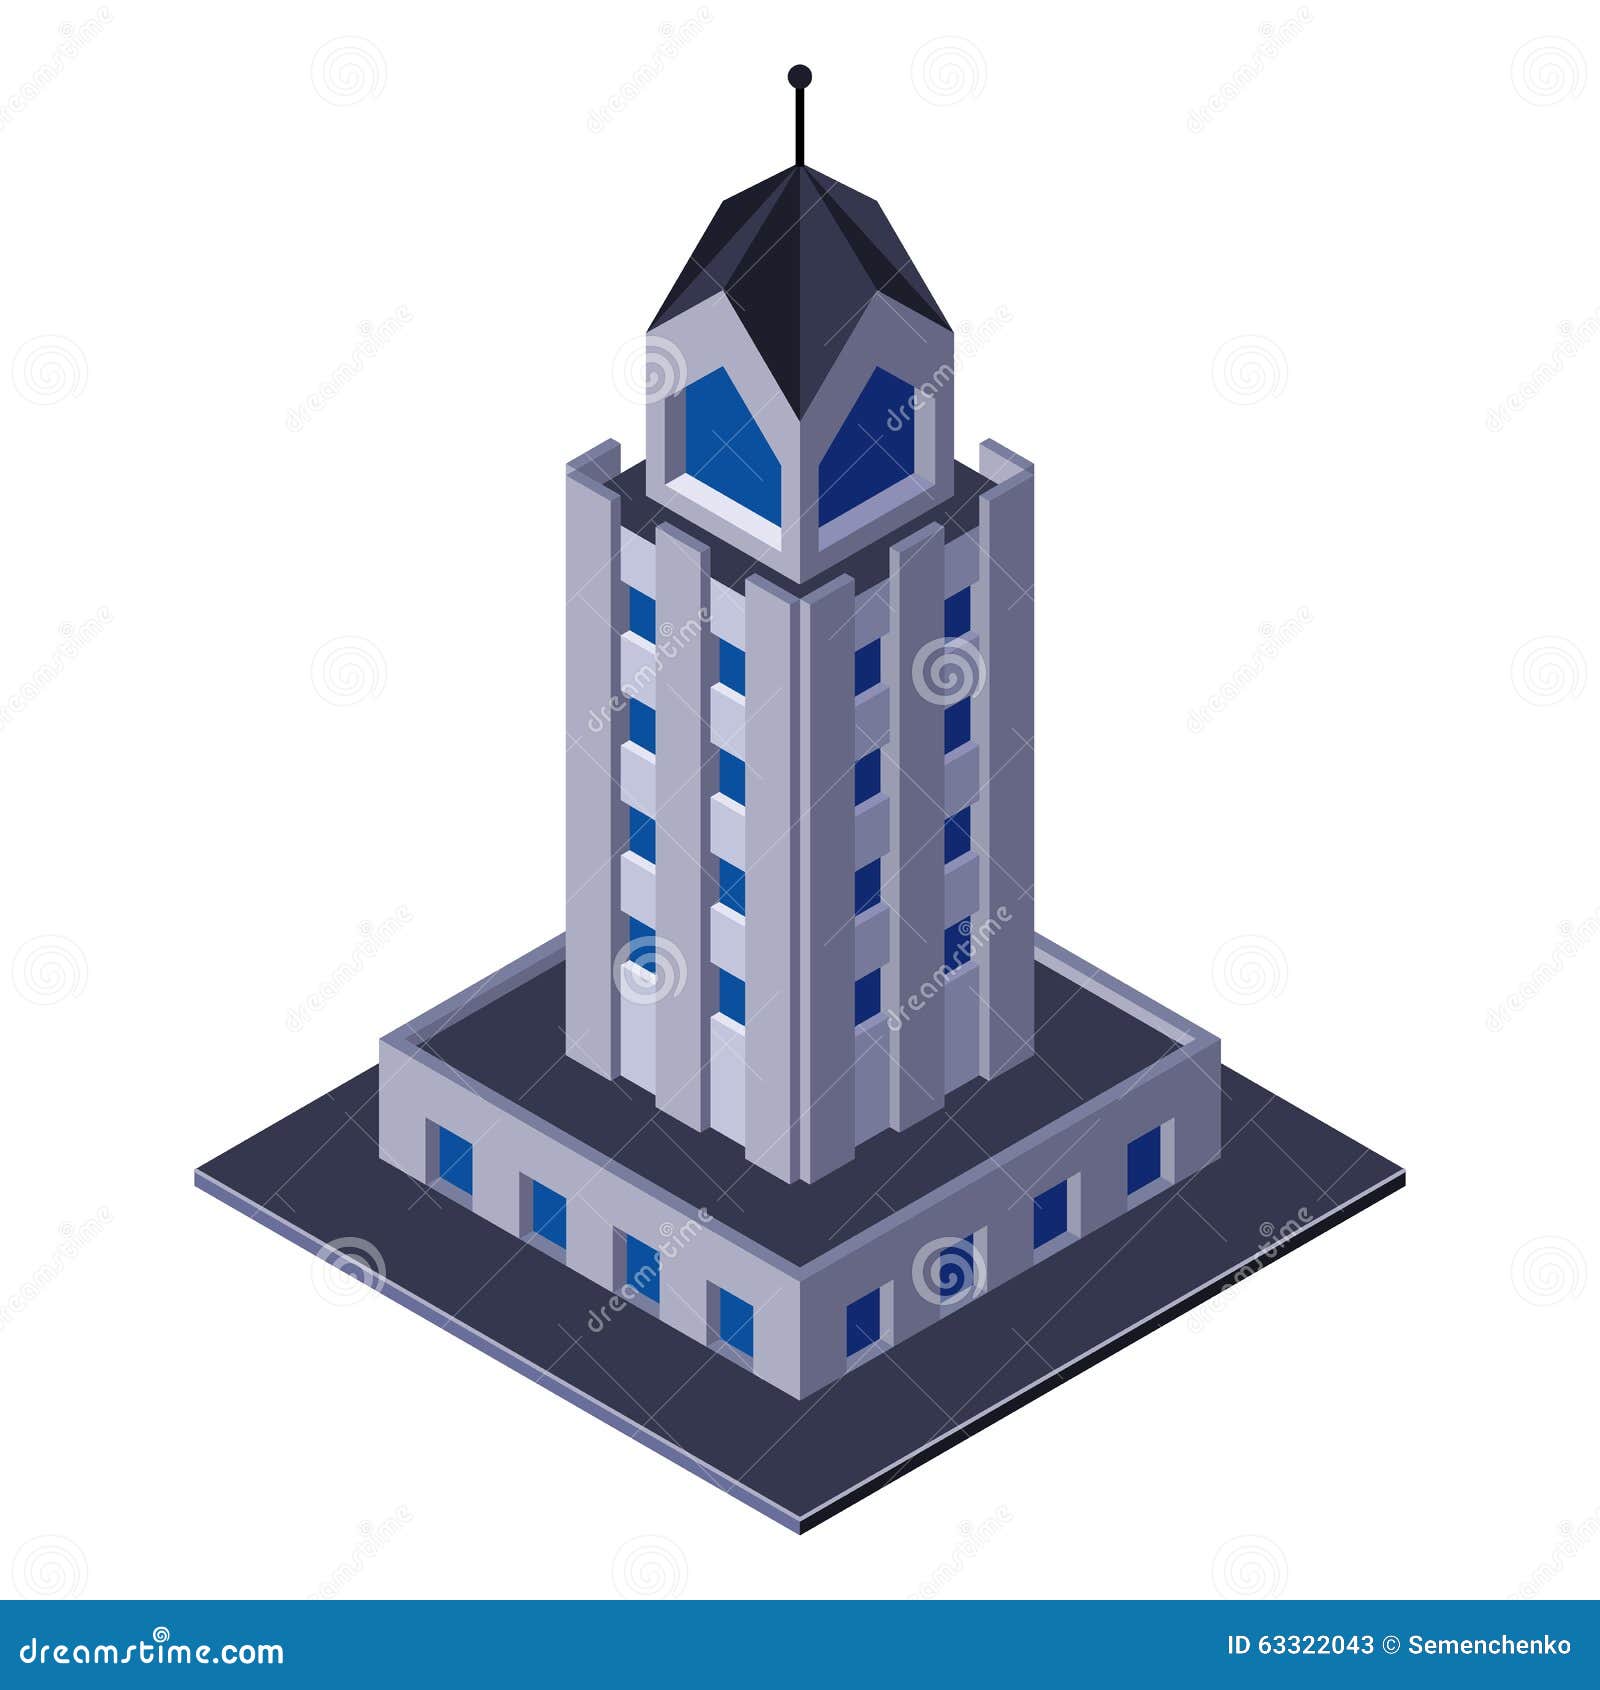 skycraper business center building, office, for real estate brochures or web icon. isometric